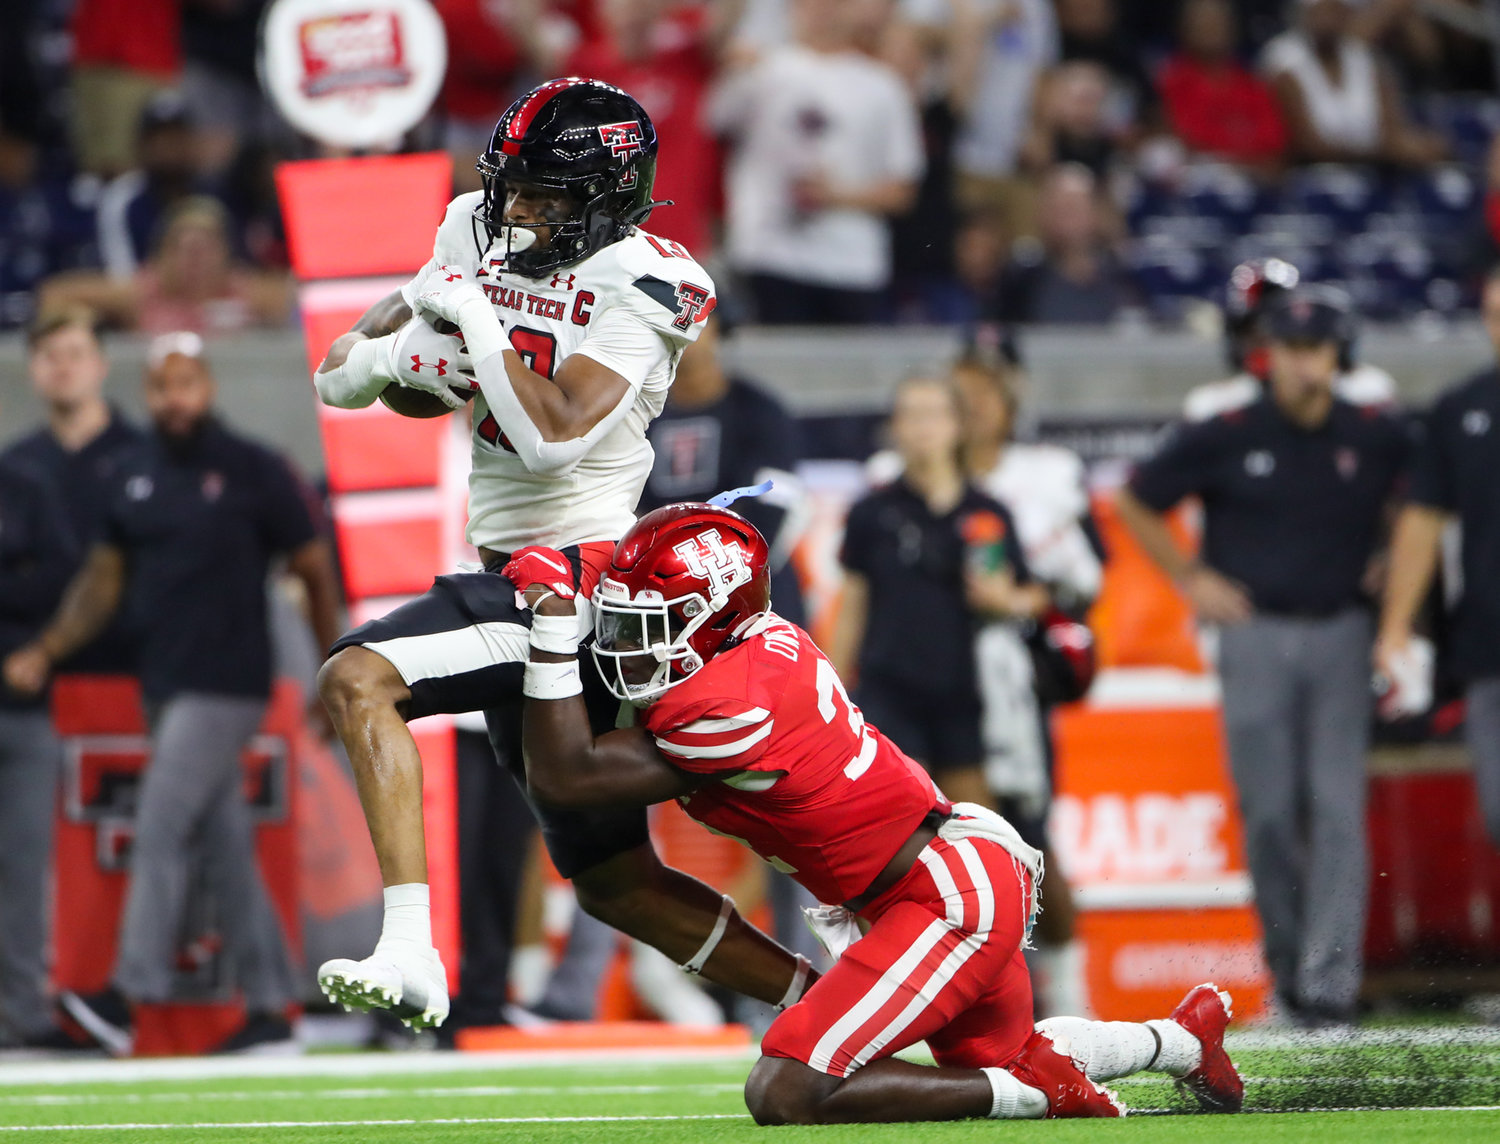 Texas Tech Red Raiders wide receiver Erik Ezukanma (13) carries the ball after a reception during an NCAA football game between Houston and Texas Tech on September 4, 2021 in Houston, Texas.